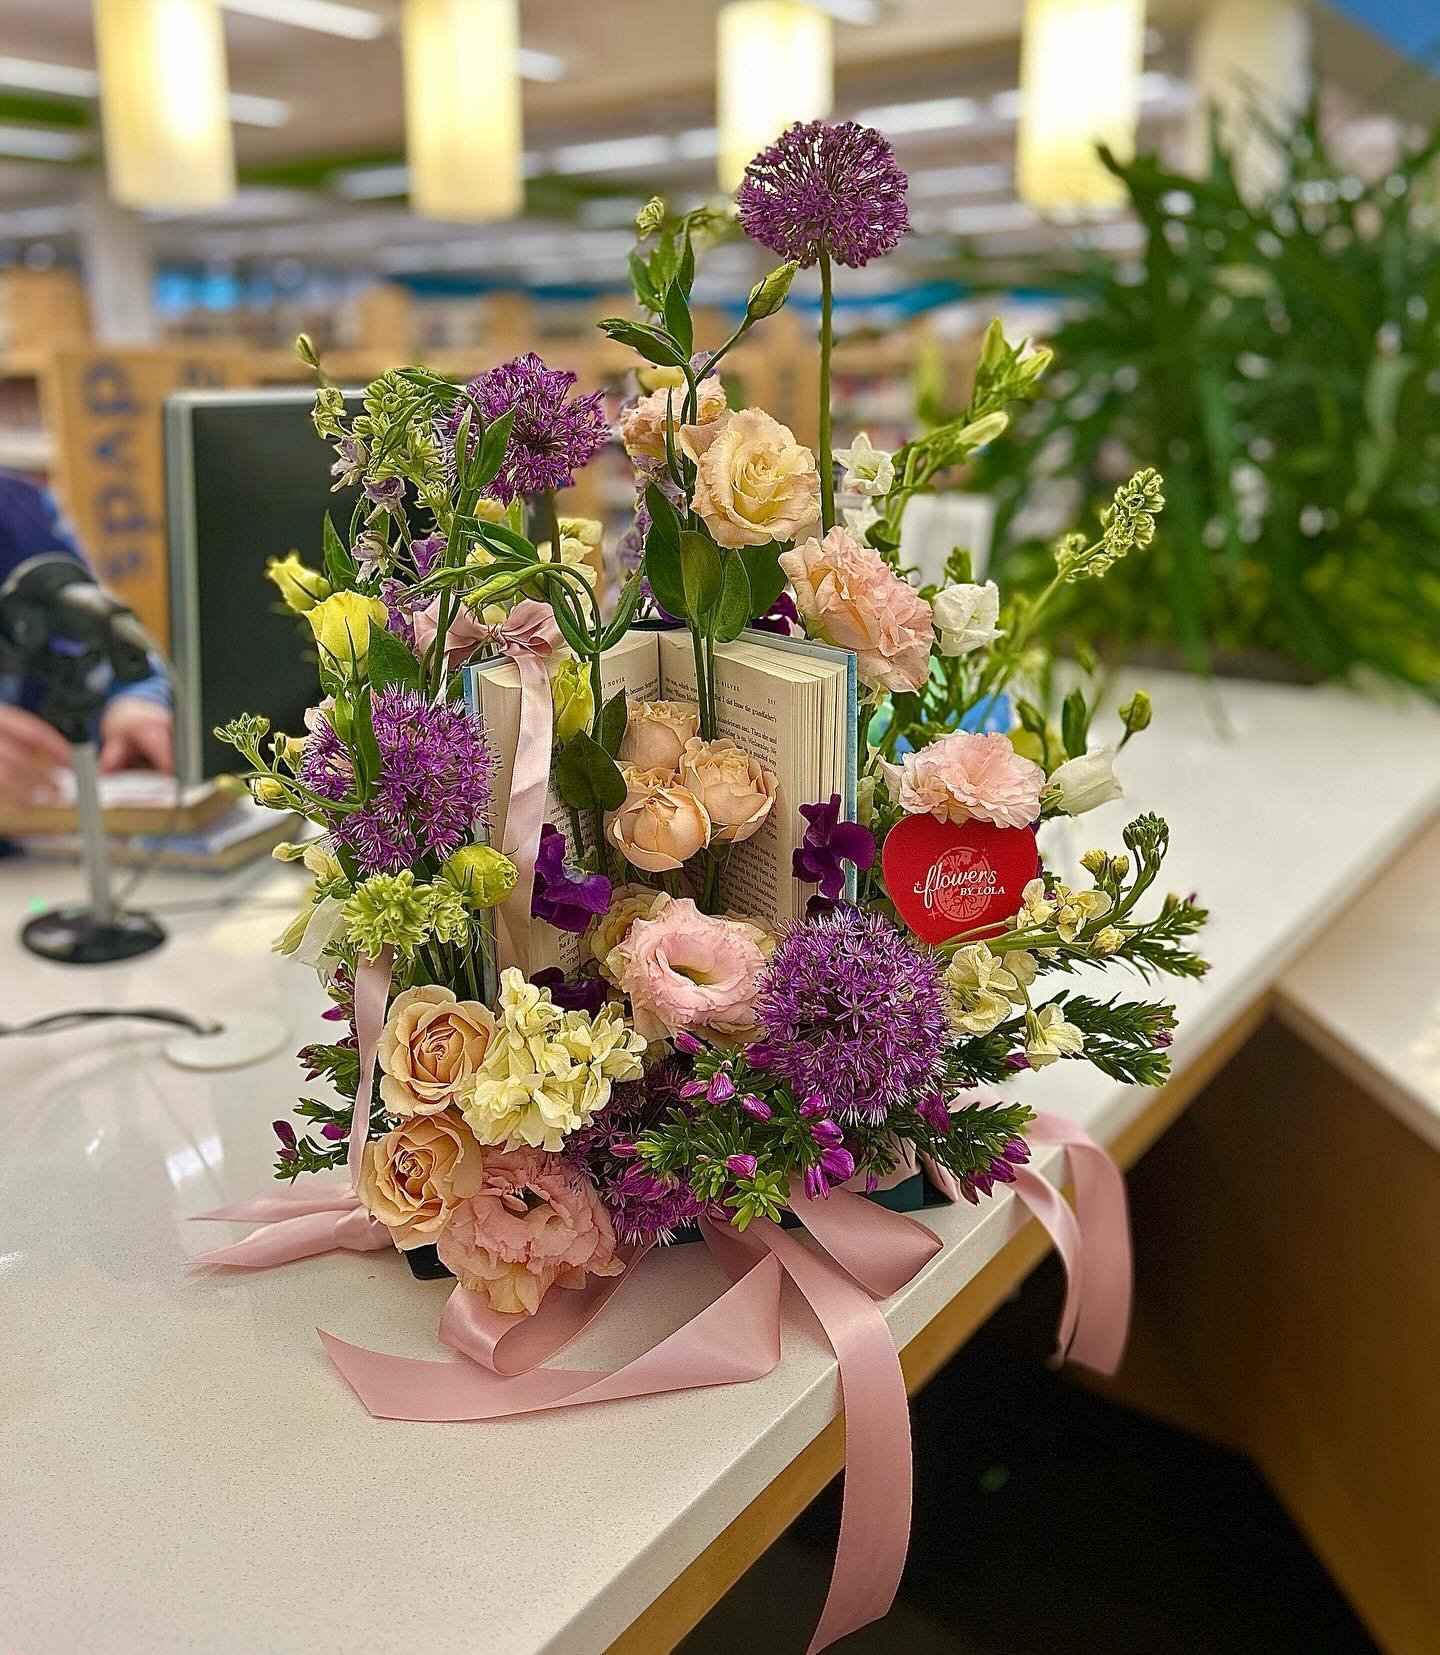 💐📚𝓑𝓸𝓸𝓴𝓼 𝓲𝓷 𝓑𝓵𝓸𝓸𝓶 📚💐

Thank you to @ncartmuseum for asking me to design some gorgeous florals for the &ldquo;Books in Bloom&rdquo; activations at @chapelhillpubliclibrary and @durhamcountylibrary today! See everyone next week at Art in